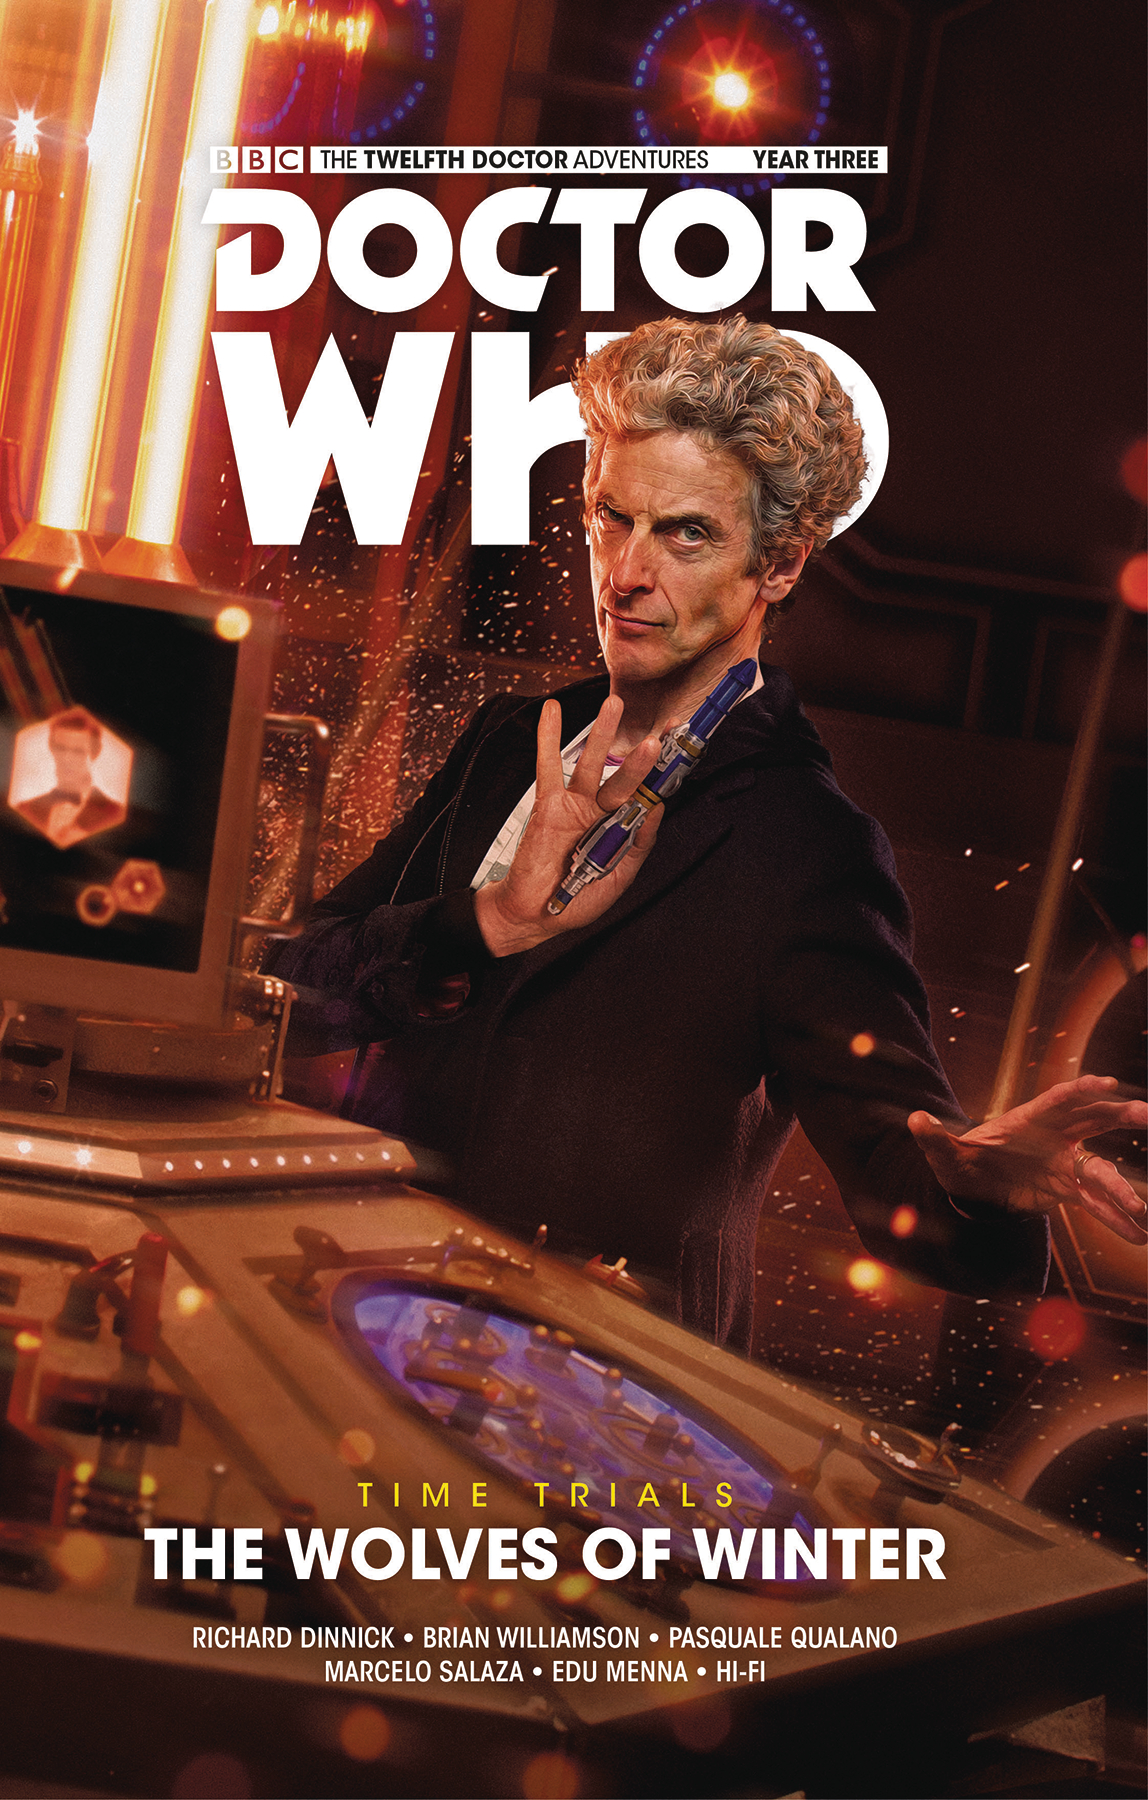 Doctor Who 12th Doctor Hardcover Graphic Novel Volume 8 Wolves of Winter